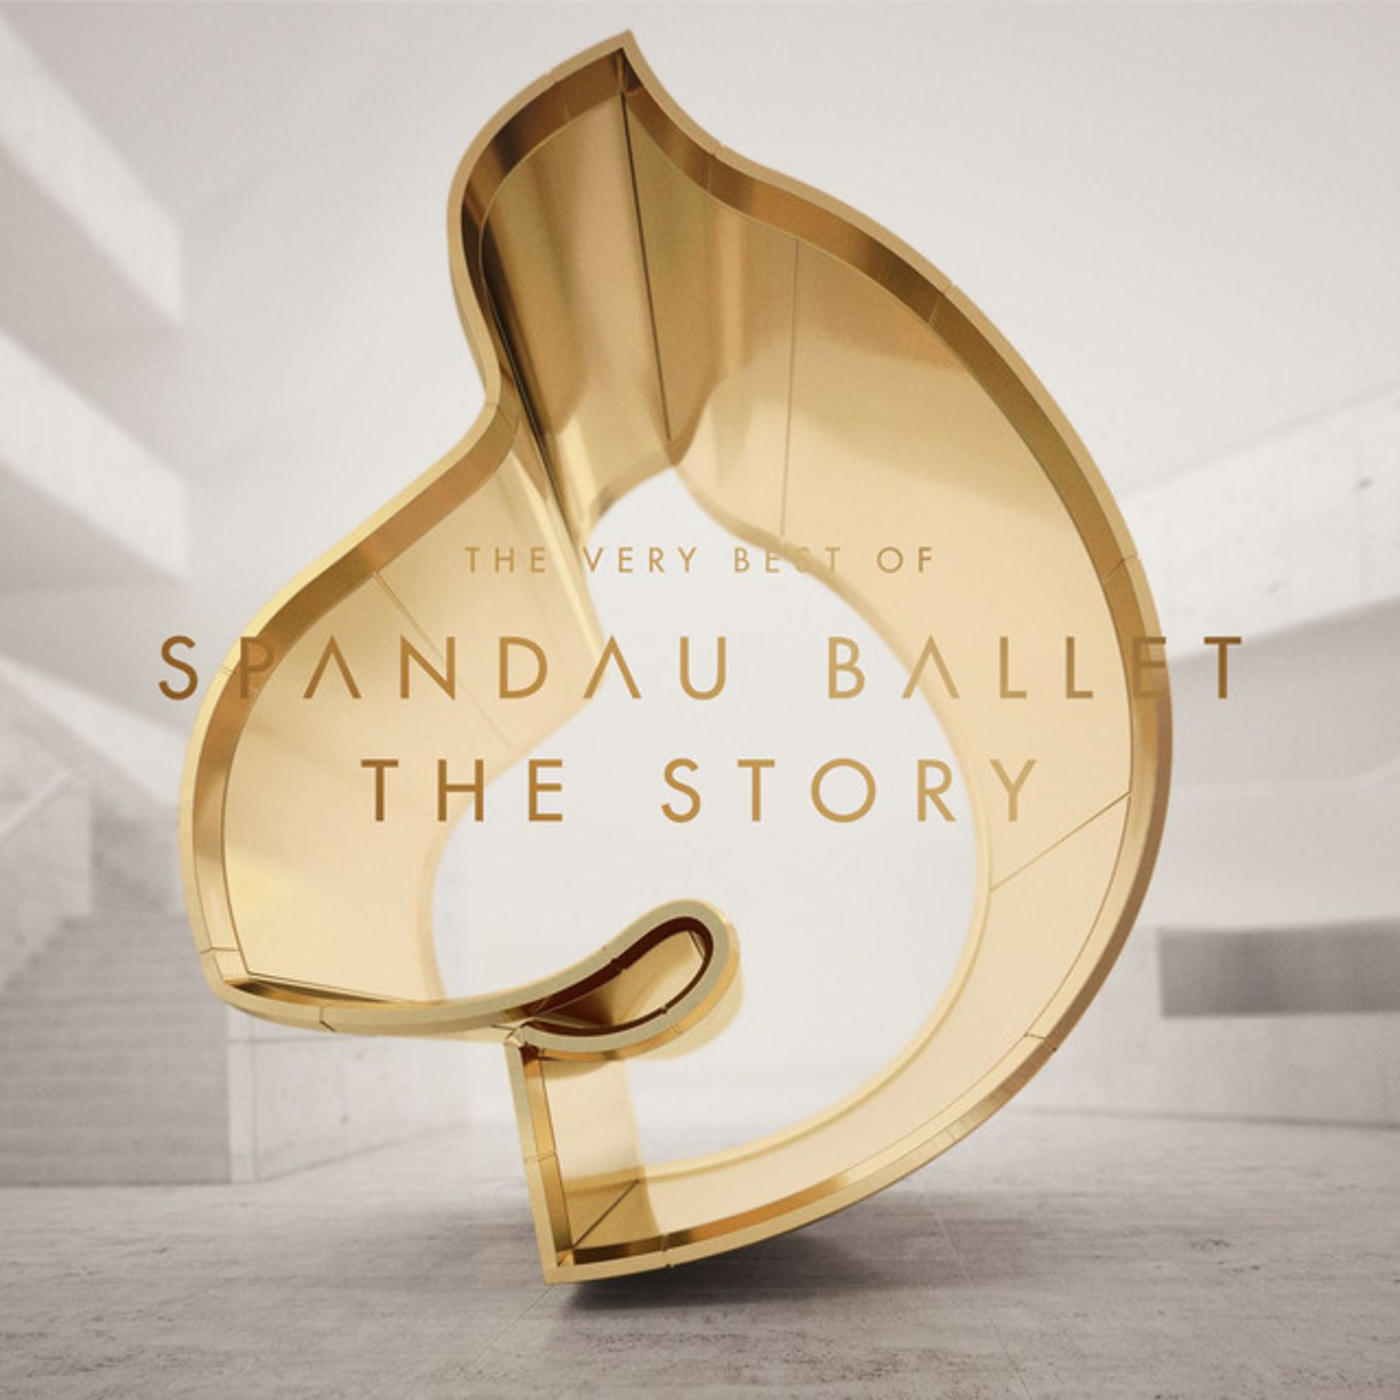 Spandau Ballet ''The Story'' The Very Best of